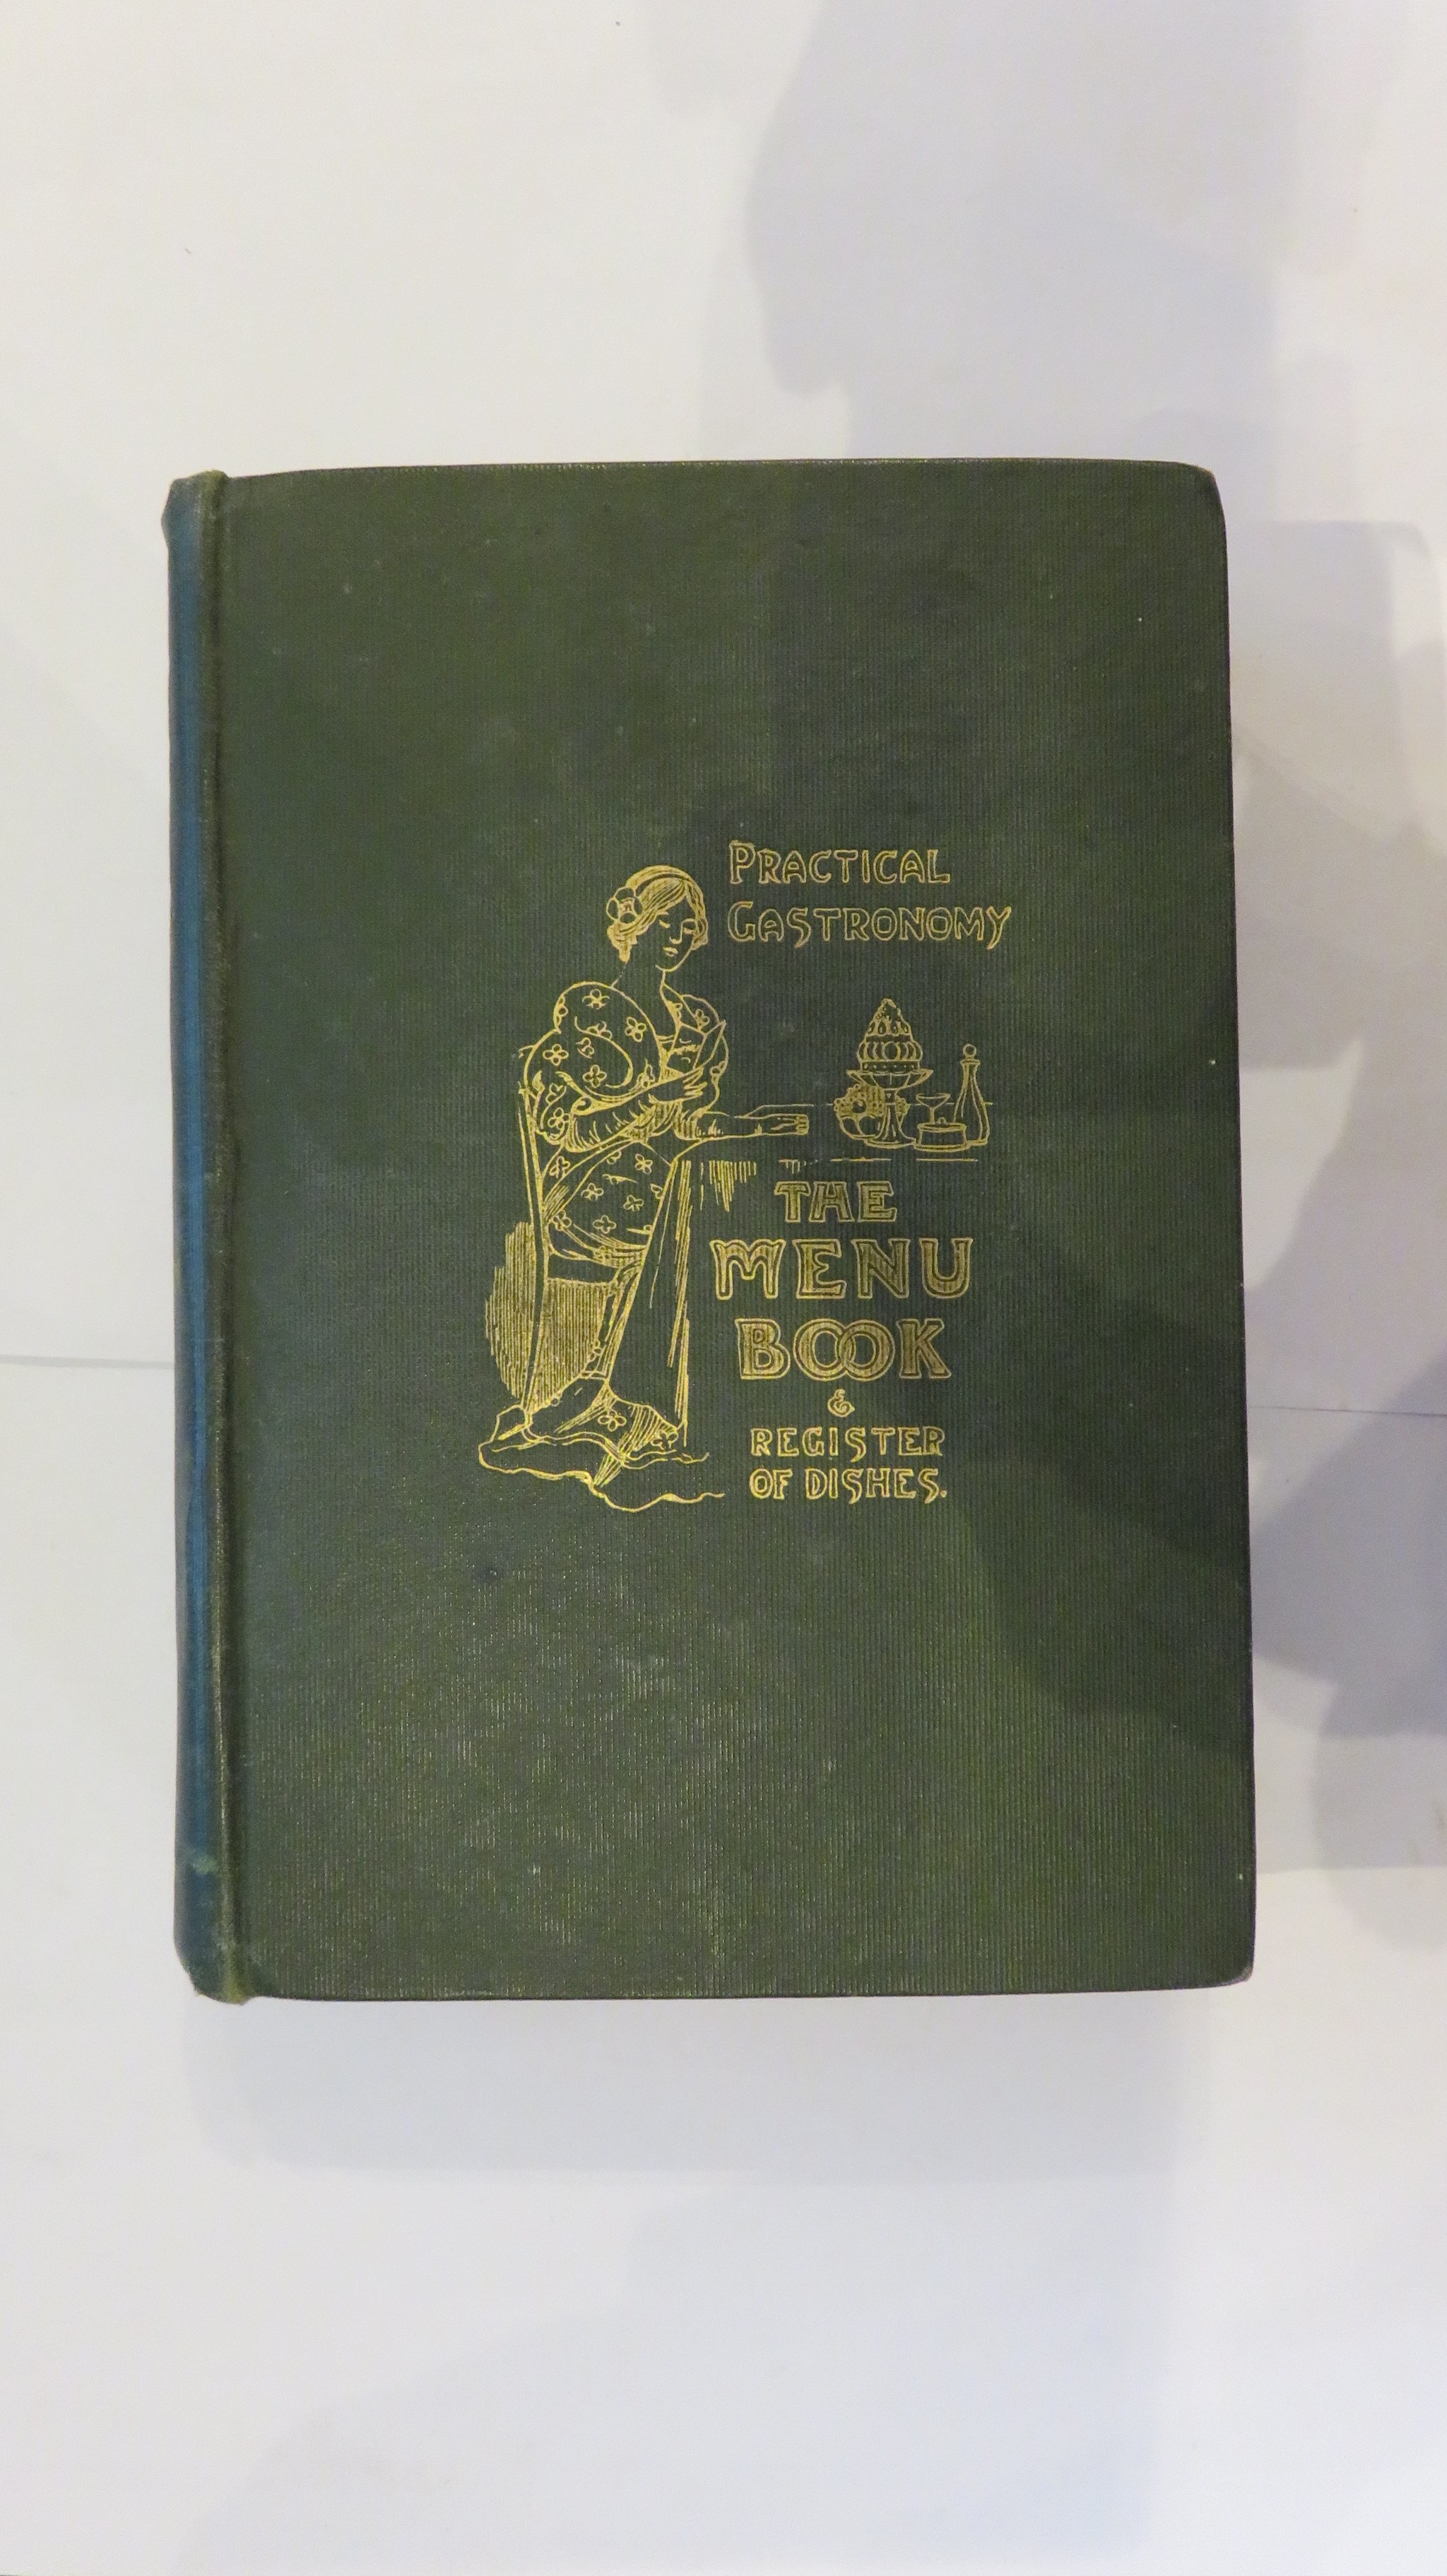 The Menu Book & Register of Dishes